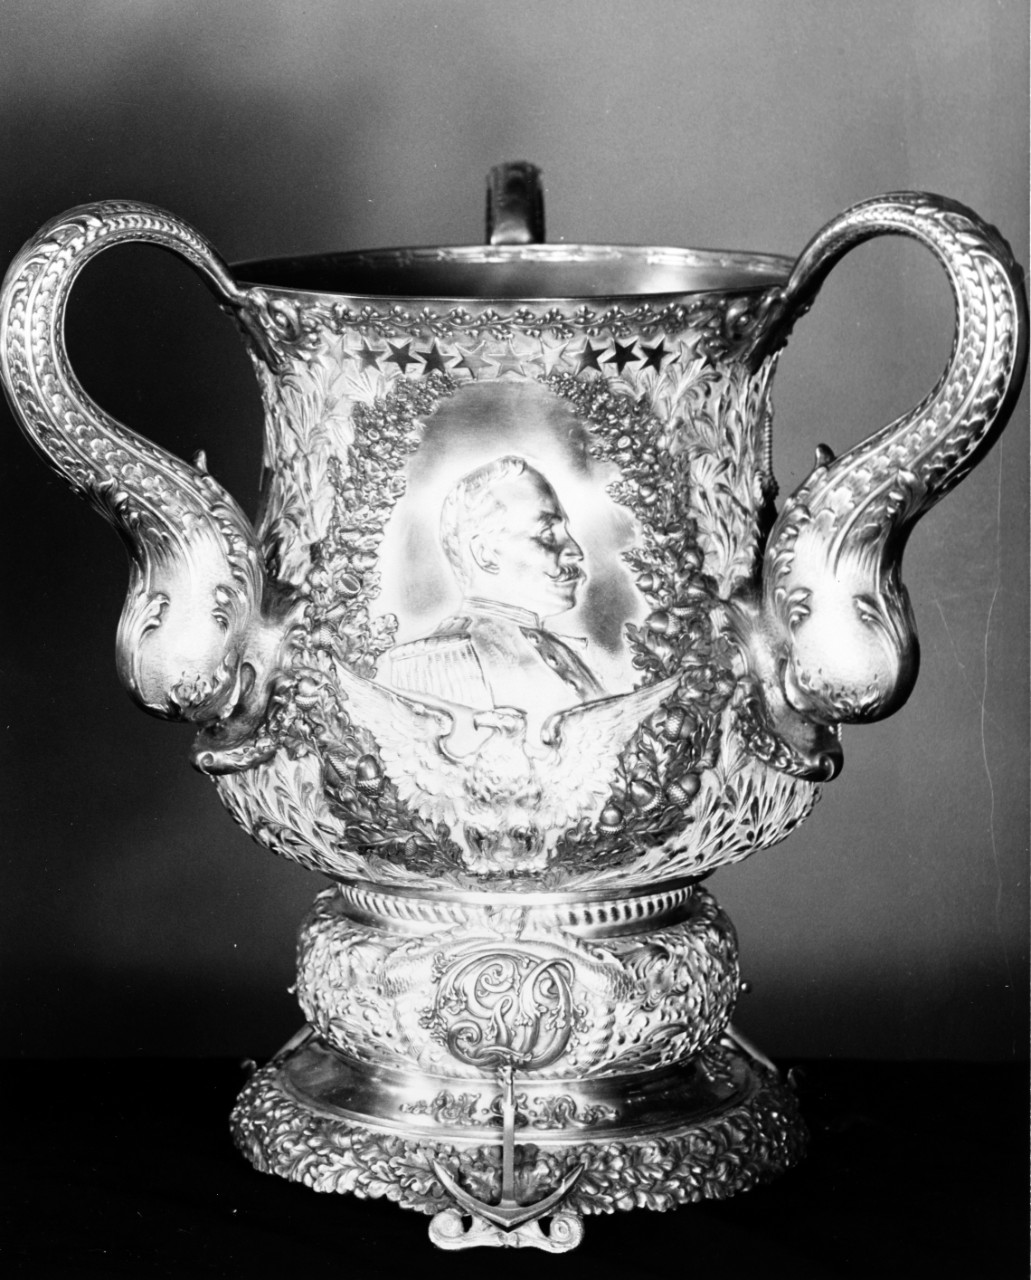 Gold Cup presented to Admiral Dewey